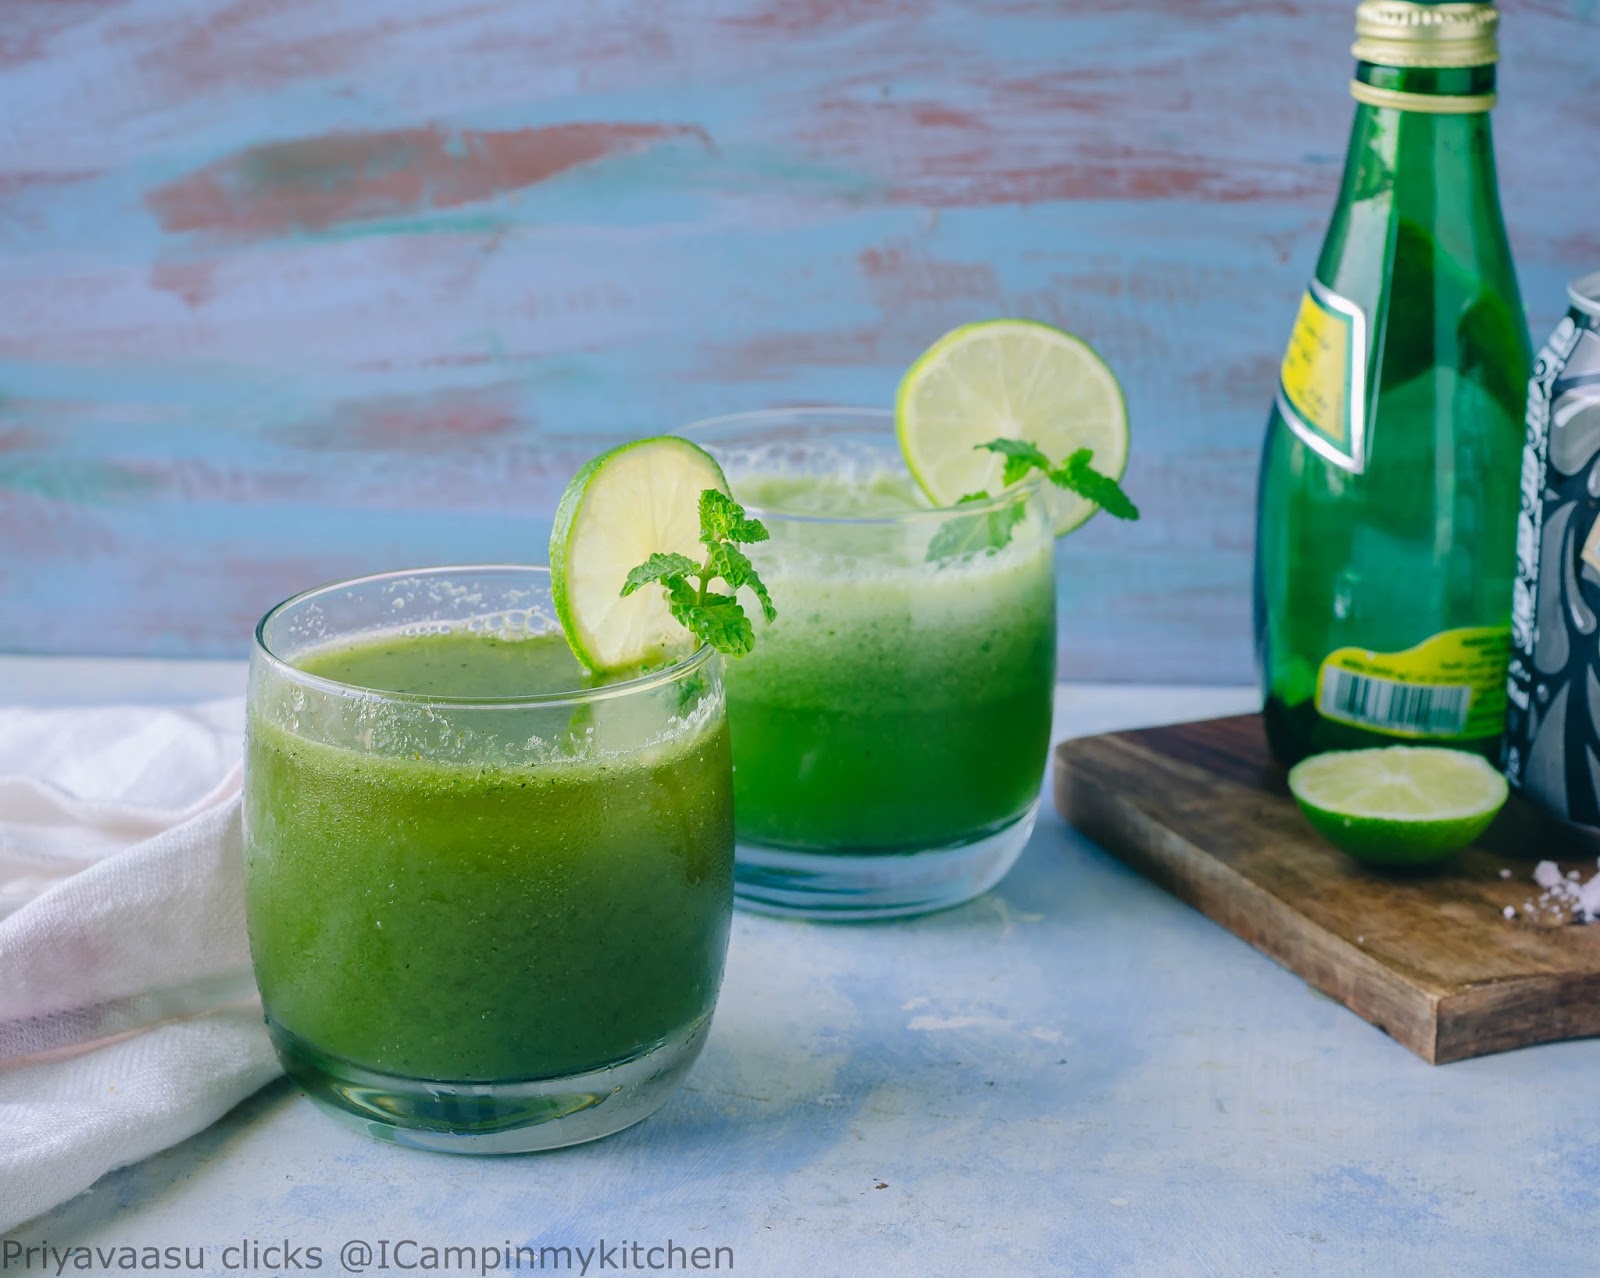 Colorful lemon and mint drink 